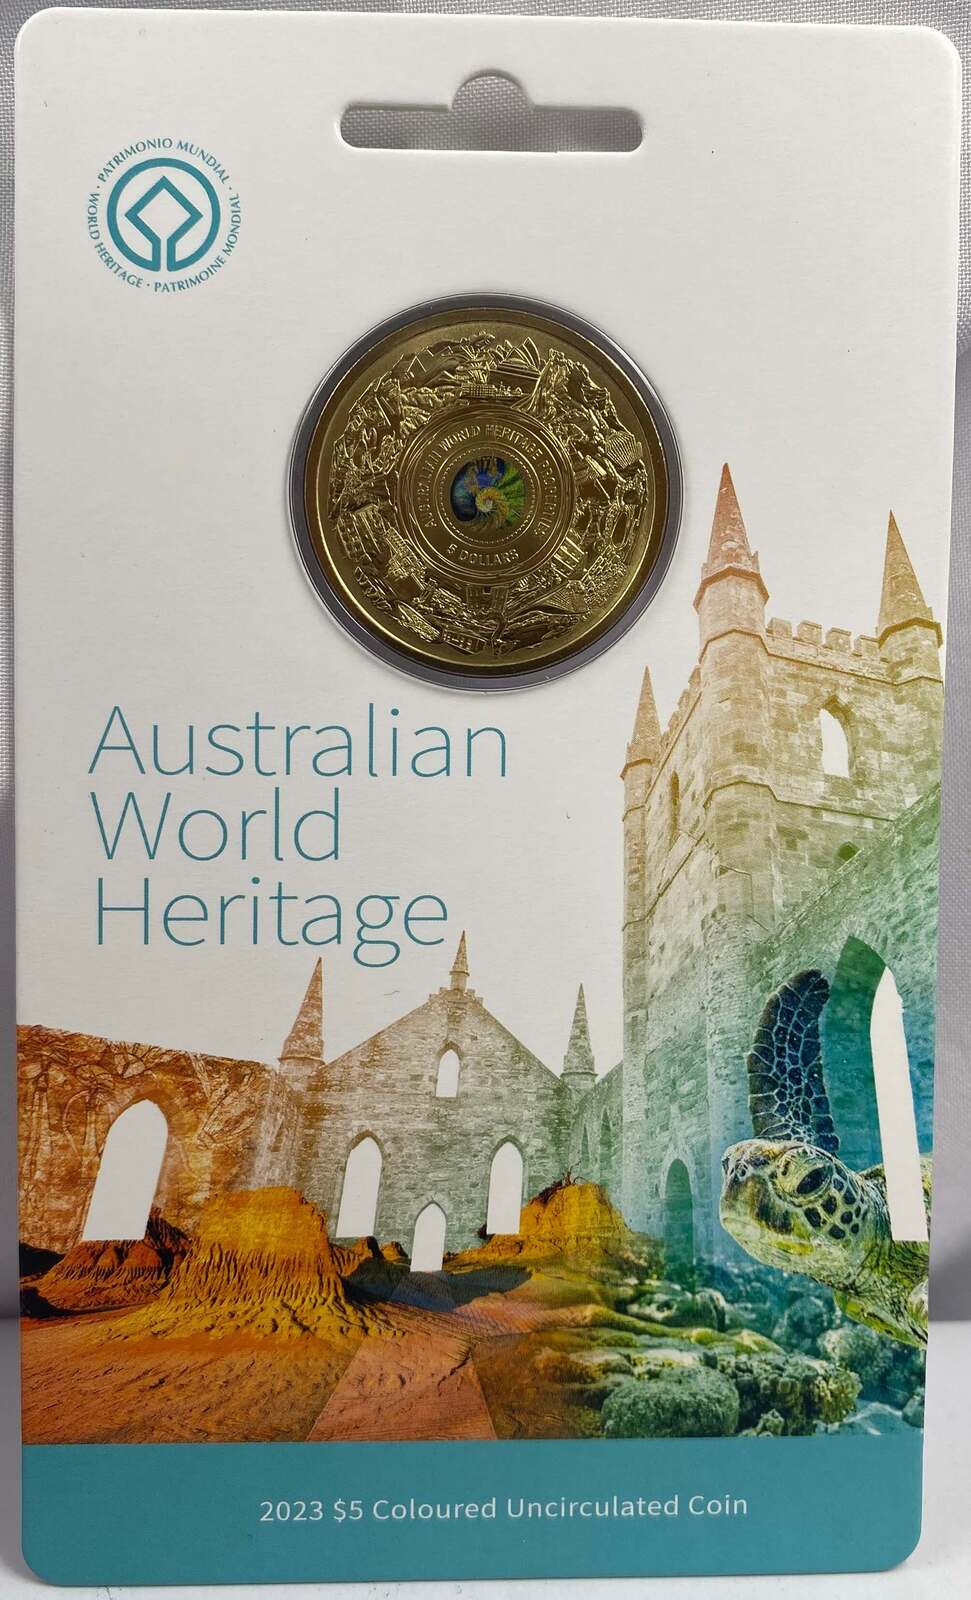 2023 $5 Coloured Uncirculated Coin - Australian World Heritage product image